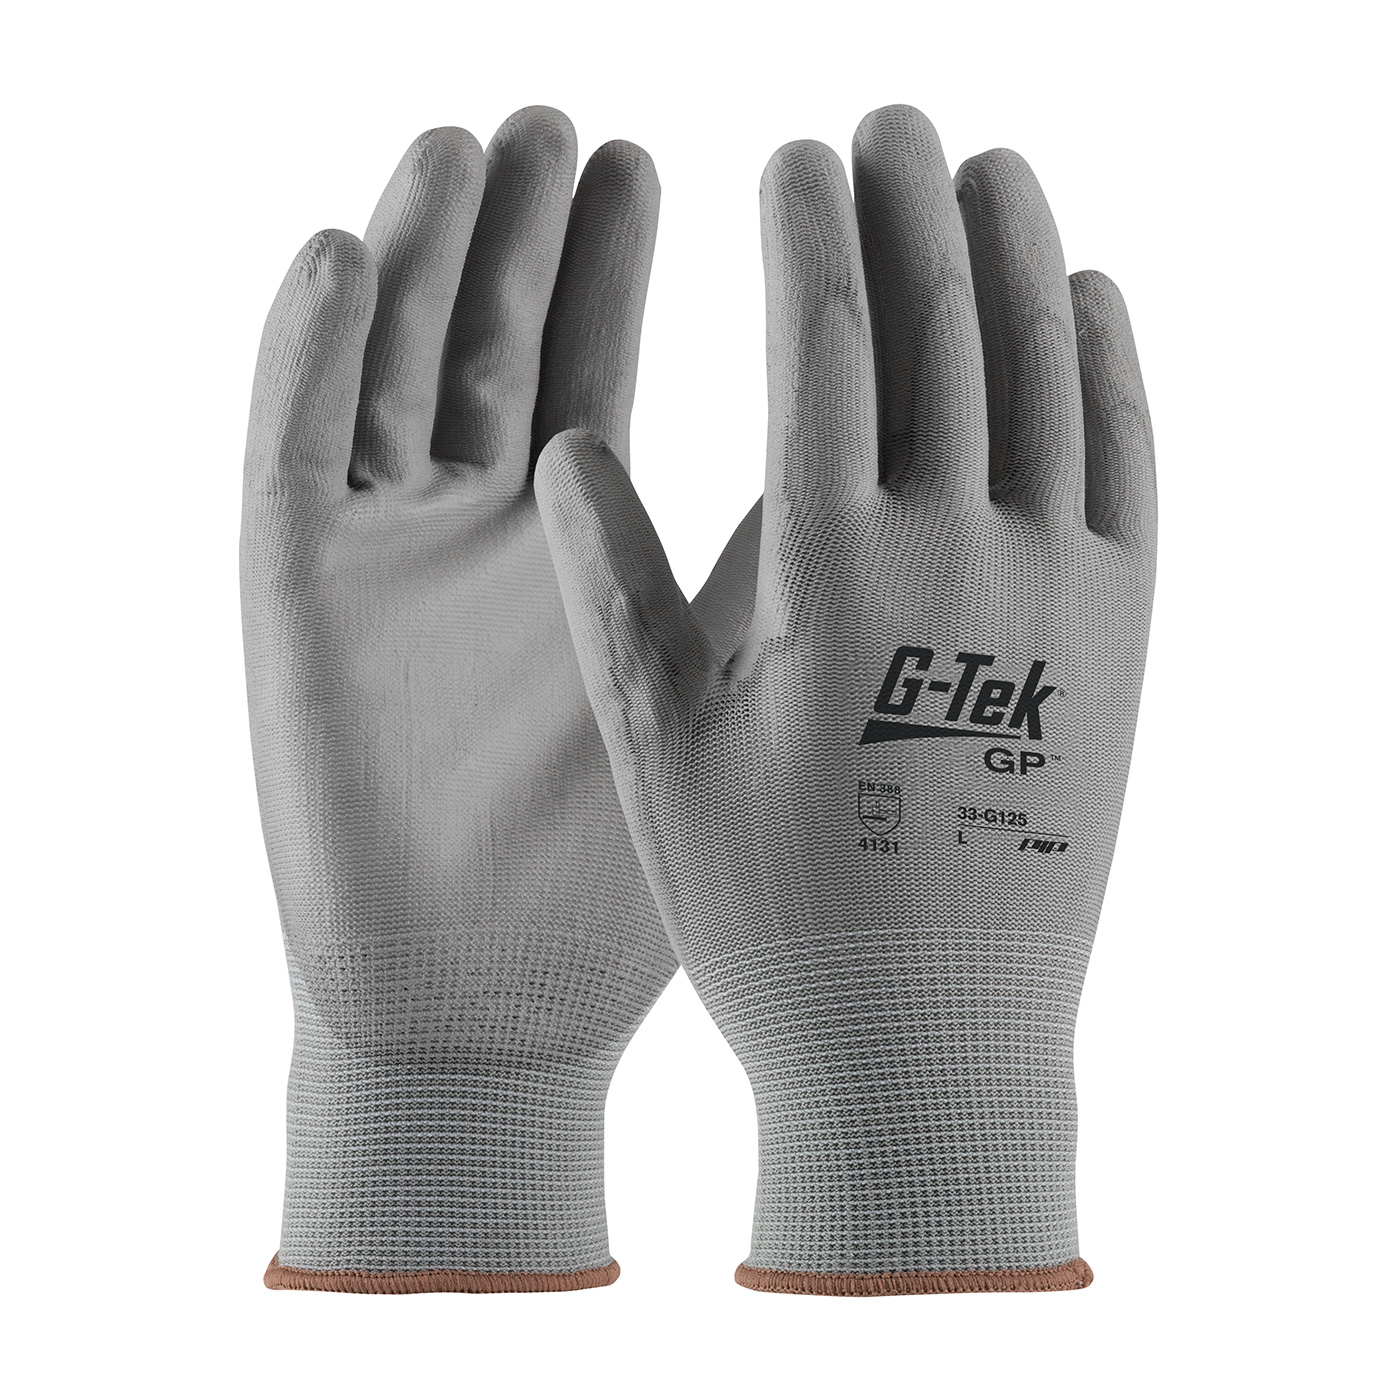 PIP 33-G125/L G-Tek GP Seamless Knit Nylon Glove with Polyurethane Coated Smooth Grip on Palm & Fingers - Large PID-33 G125 L